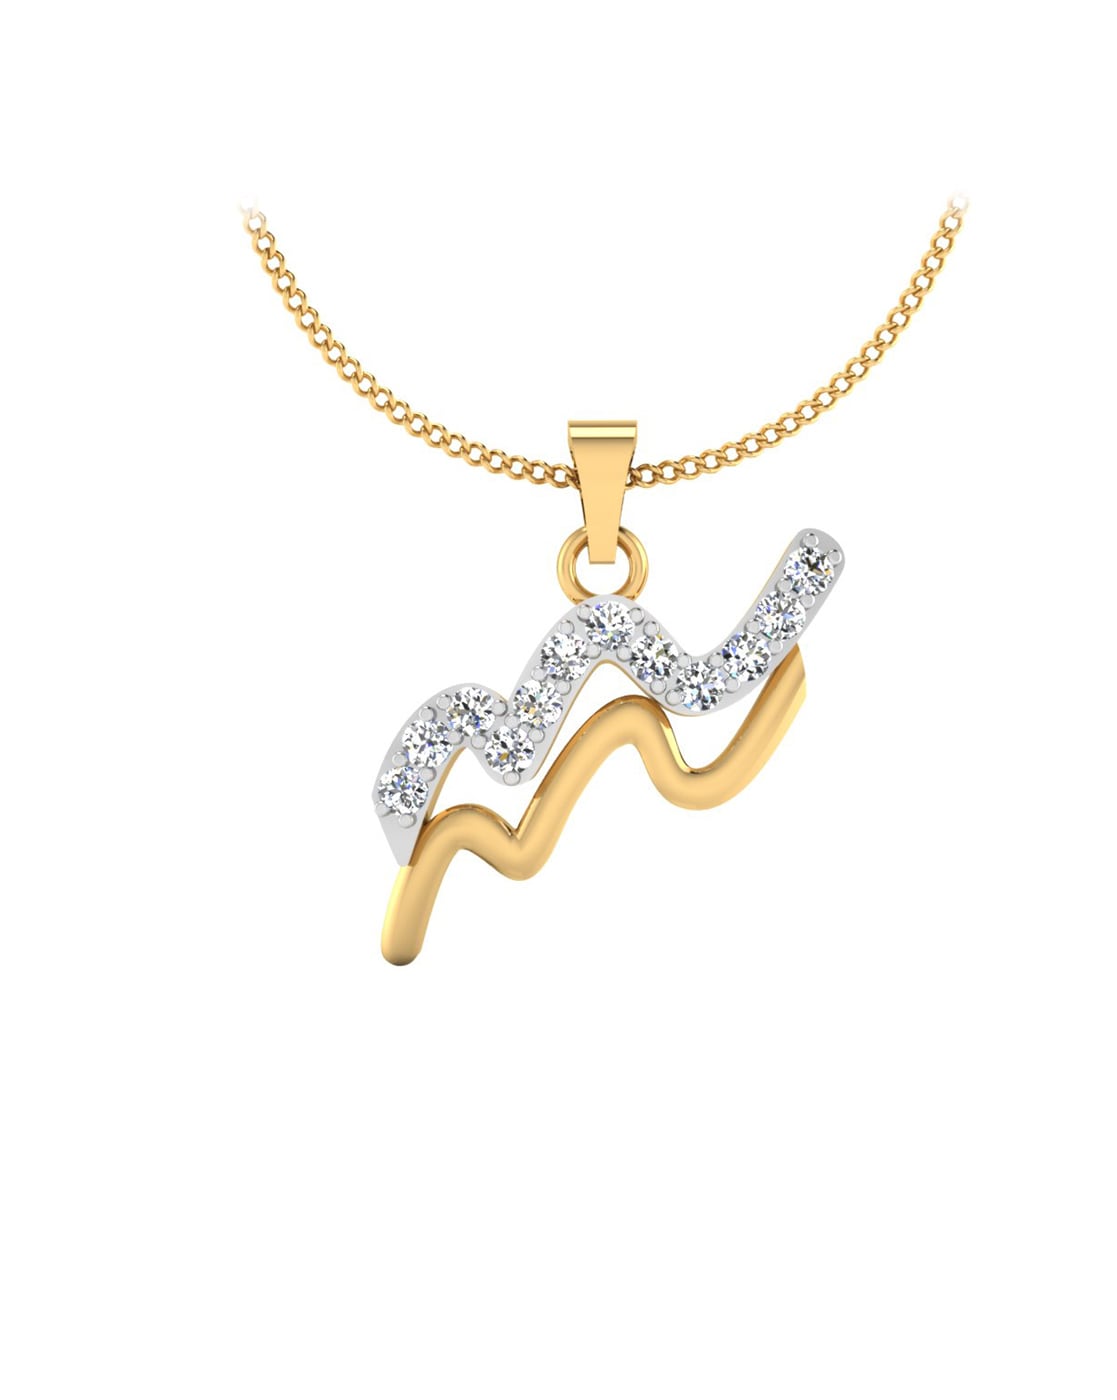 Brooke Gregson | Aquarius 14k Gold Diamond Constellation Astrology Necklace  at Voiage Jewelry